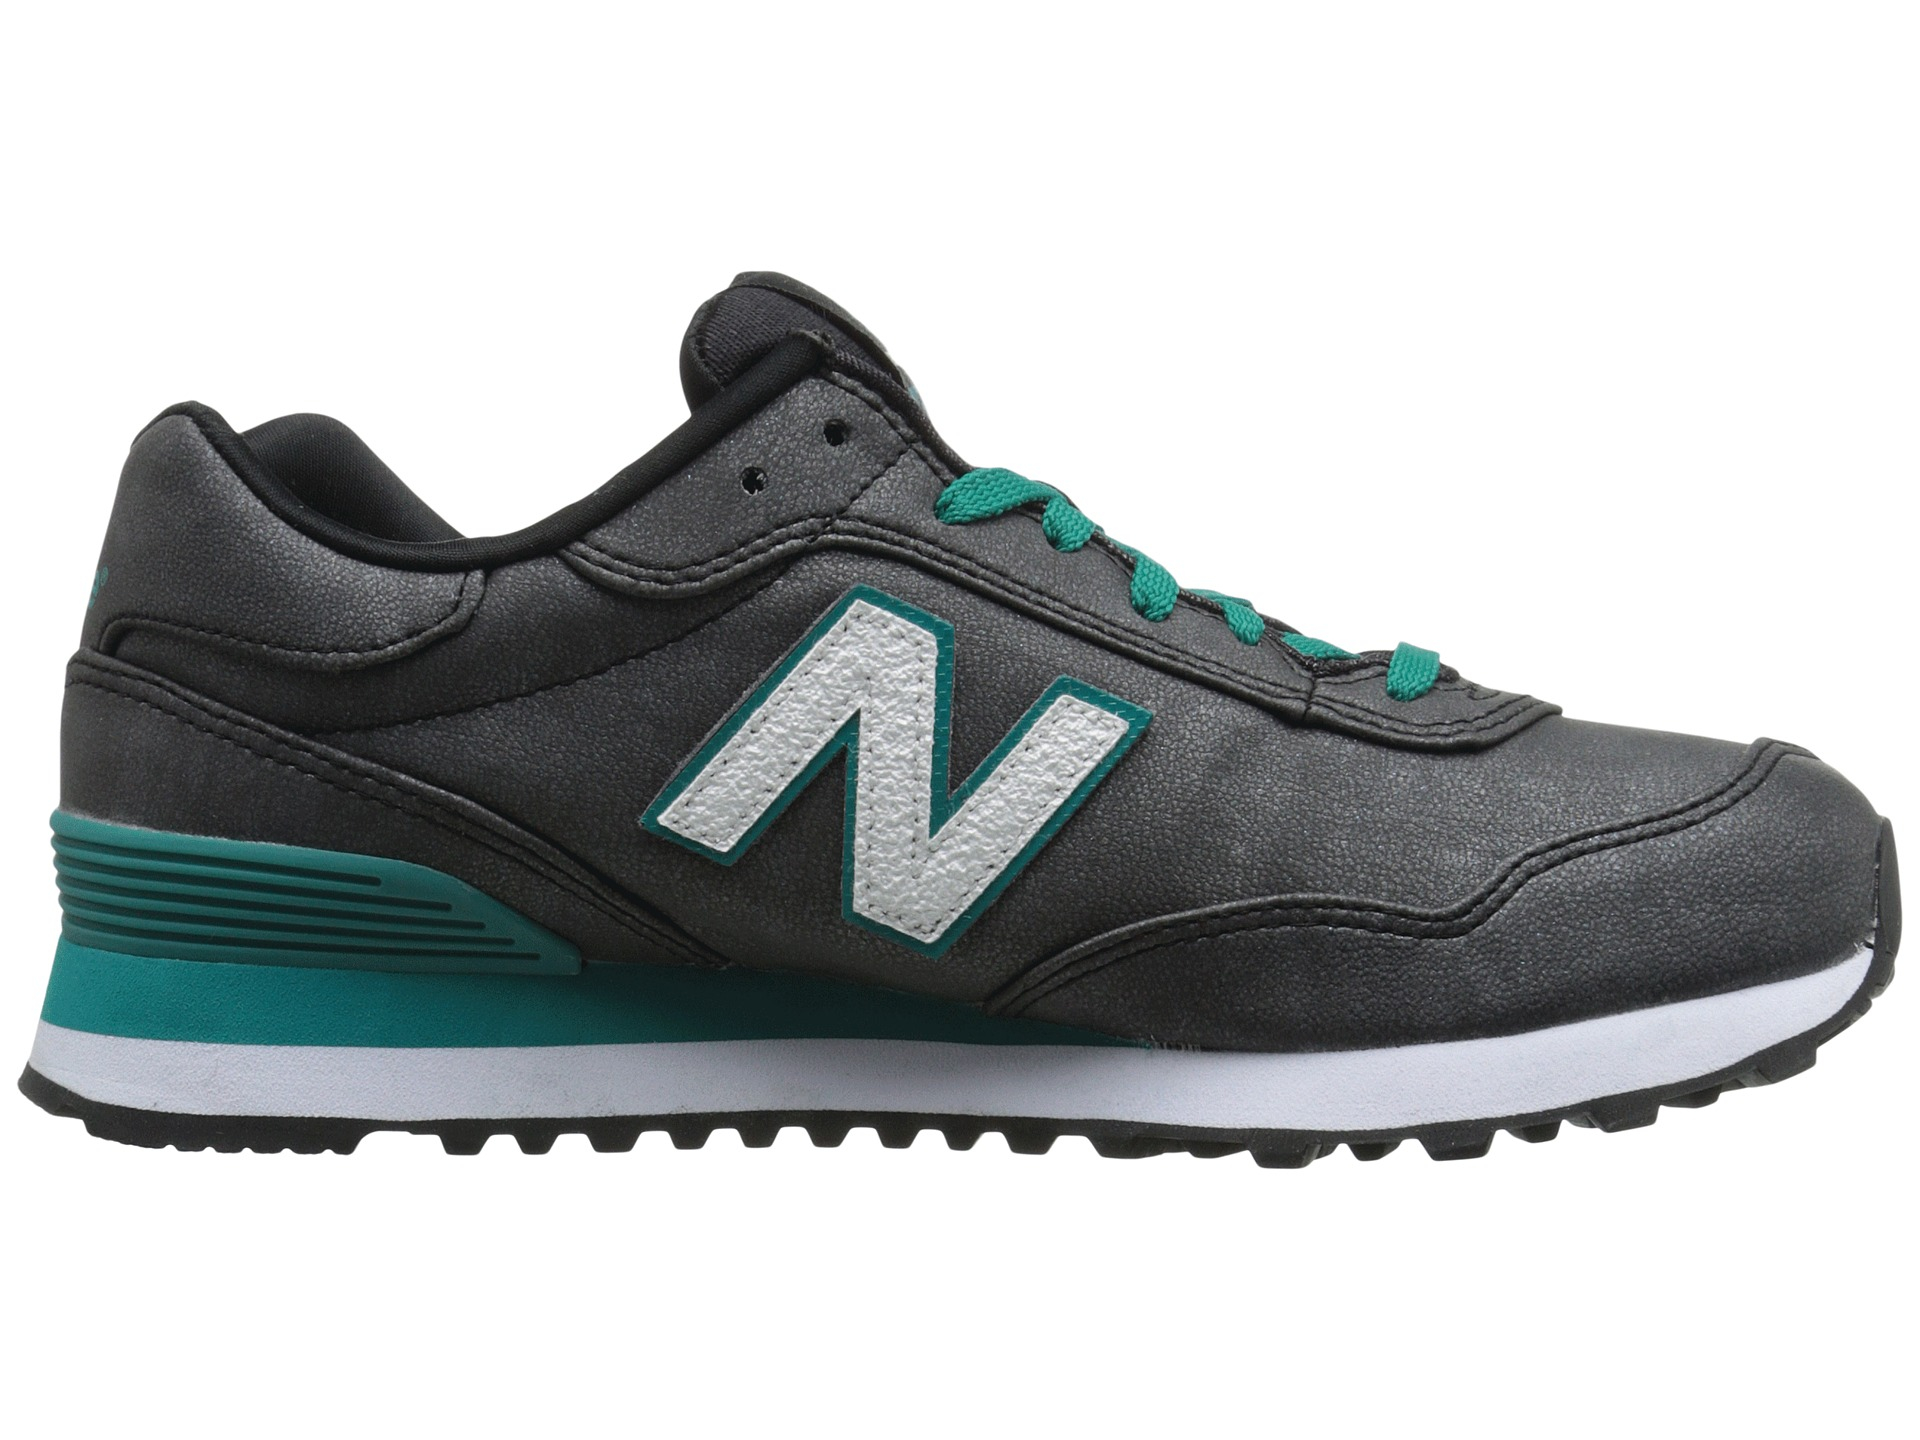 New Balance Suede Wl515 in Green - Lyst